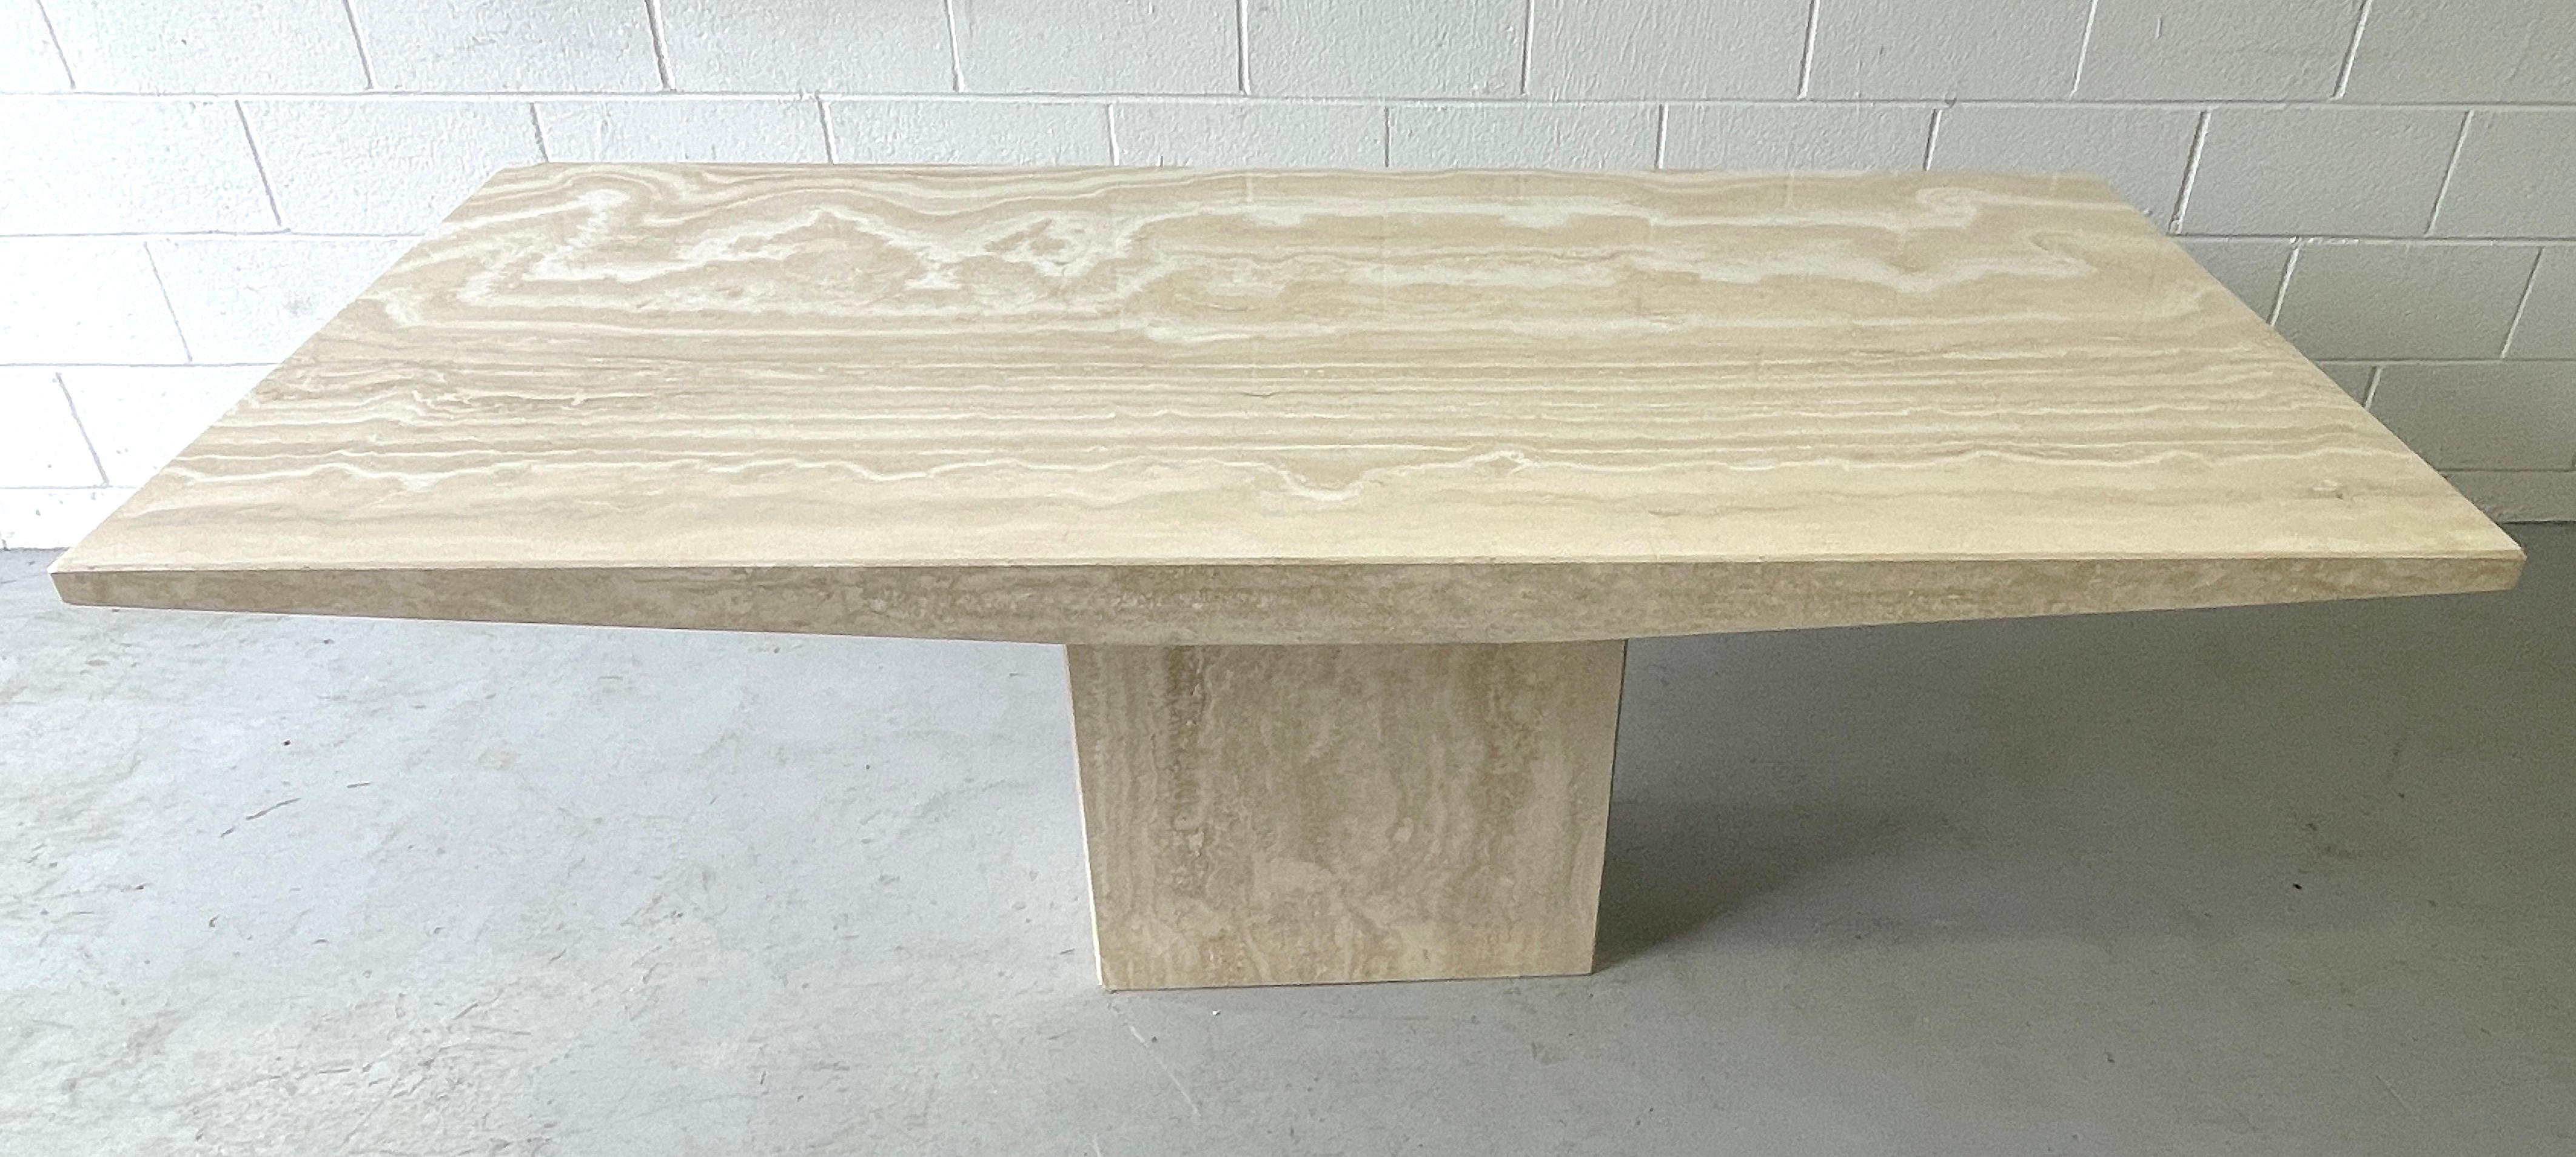 Italian Modern Sculptural Travertine Dinning Table
Italy, circa 1970s

An exceptional example of specimen quality variegated travertine, the subtle design detail of the descending slope of the side edges, add to the exceptional quality of this